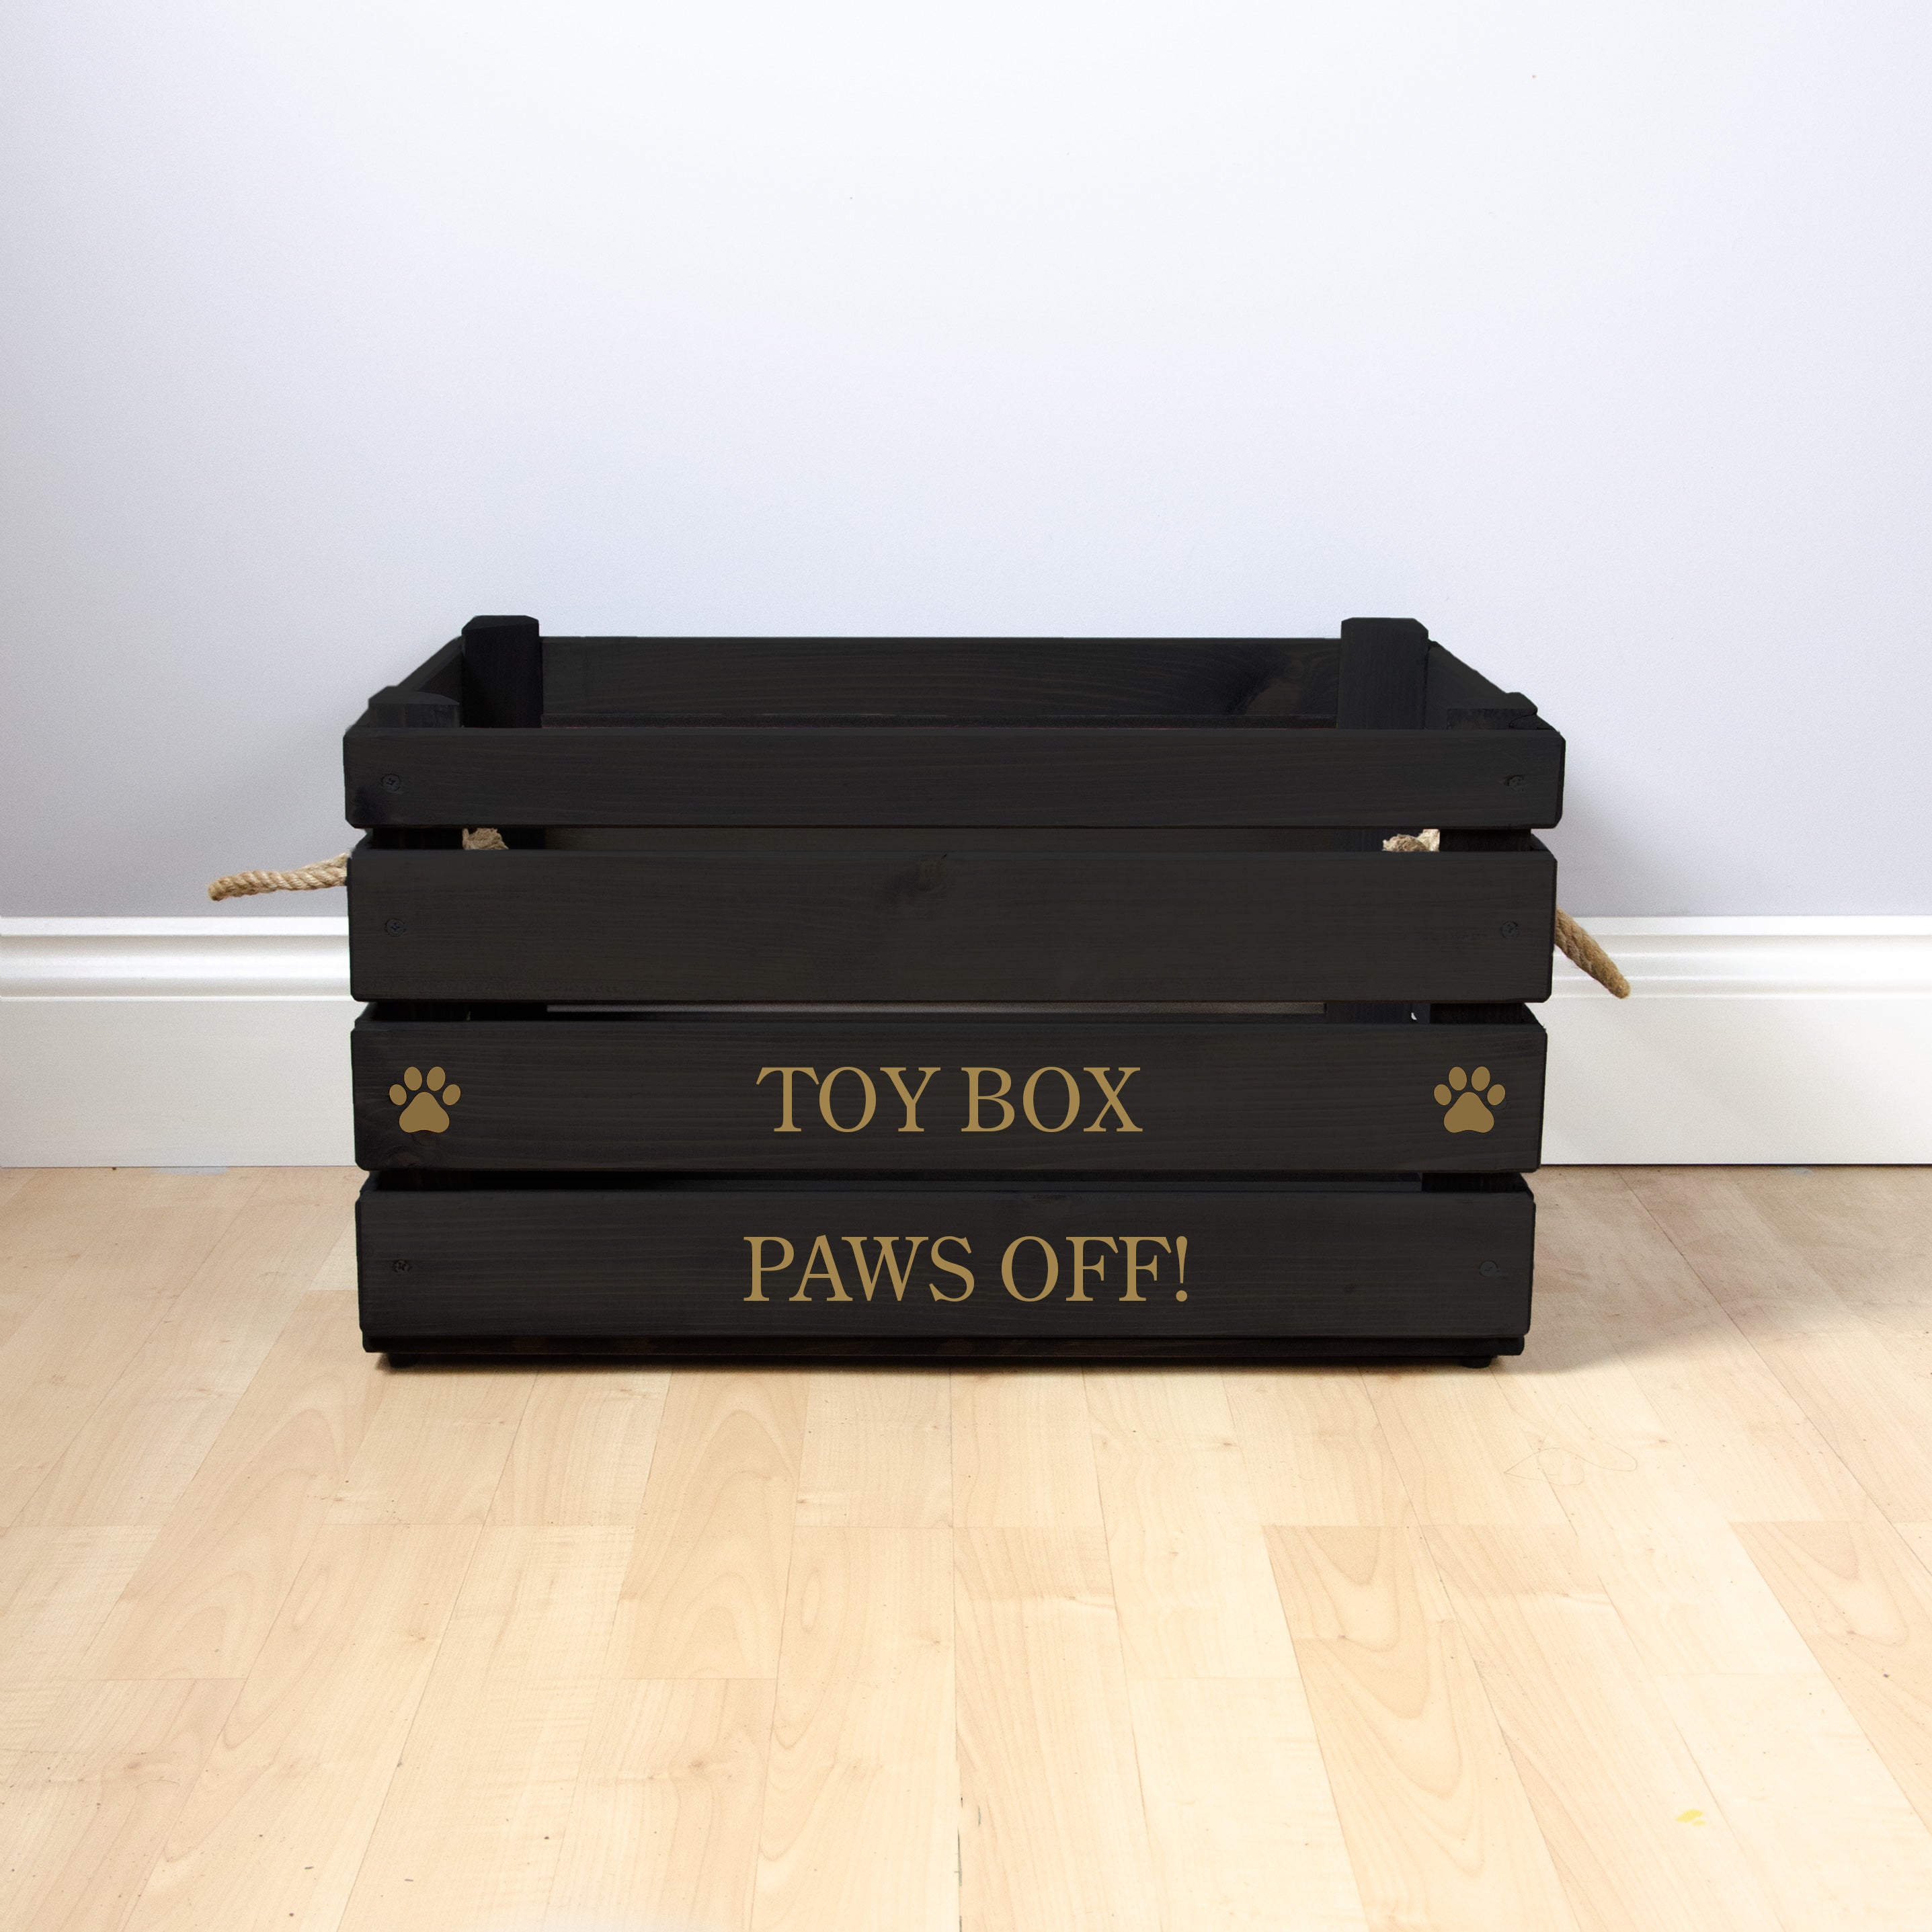 Large Personalised Cat Toy Box -Cat Toys, Personalised Cat Toys, Cat Toy Box, Medium pet toy box, Black Toy Box